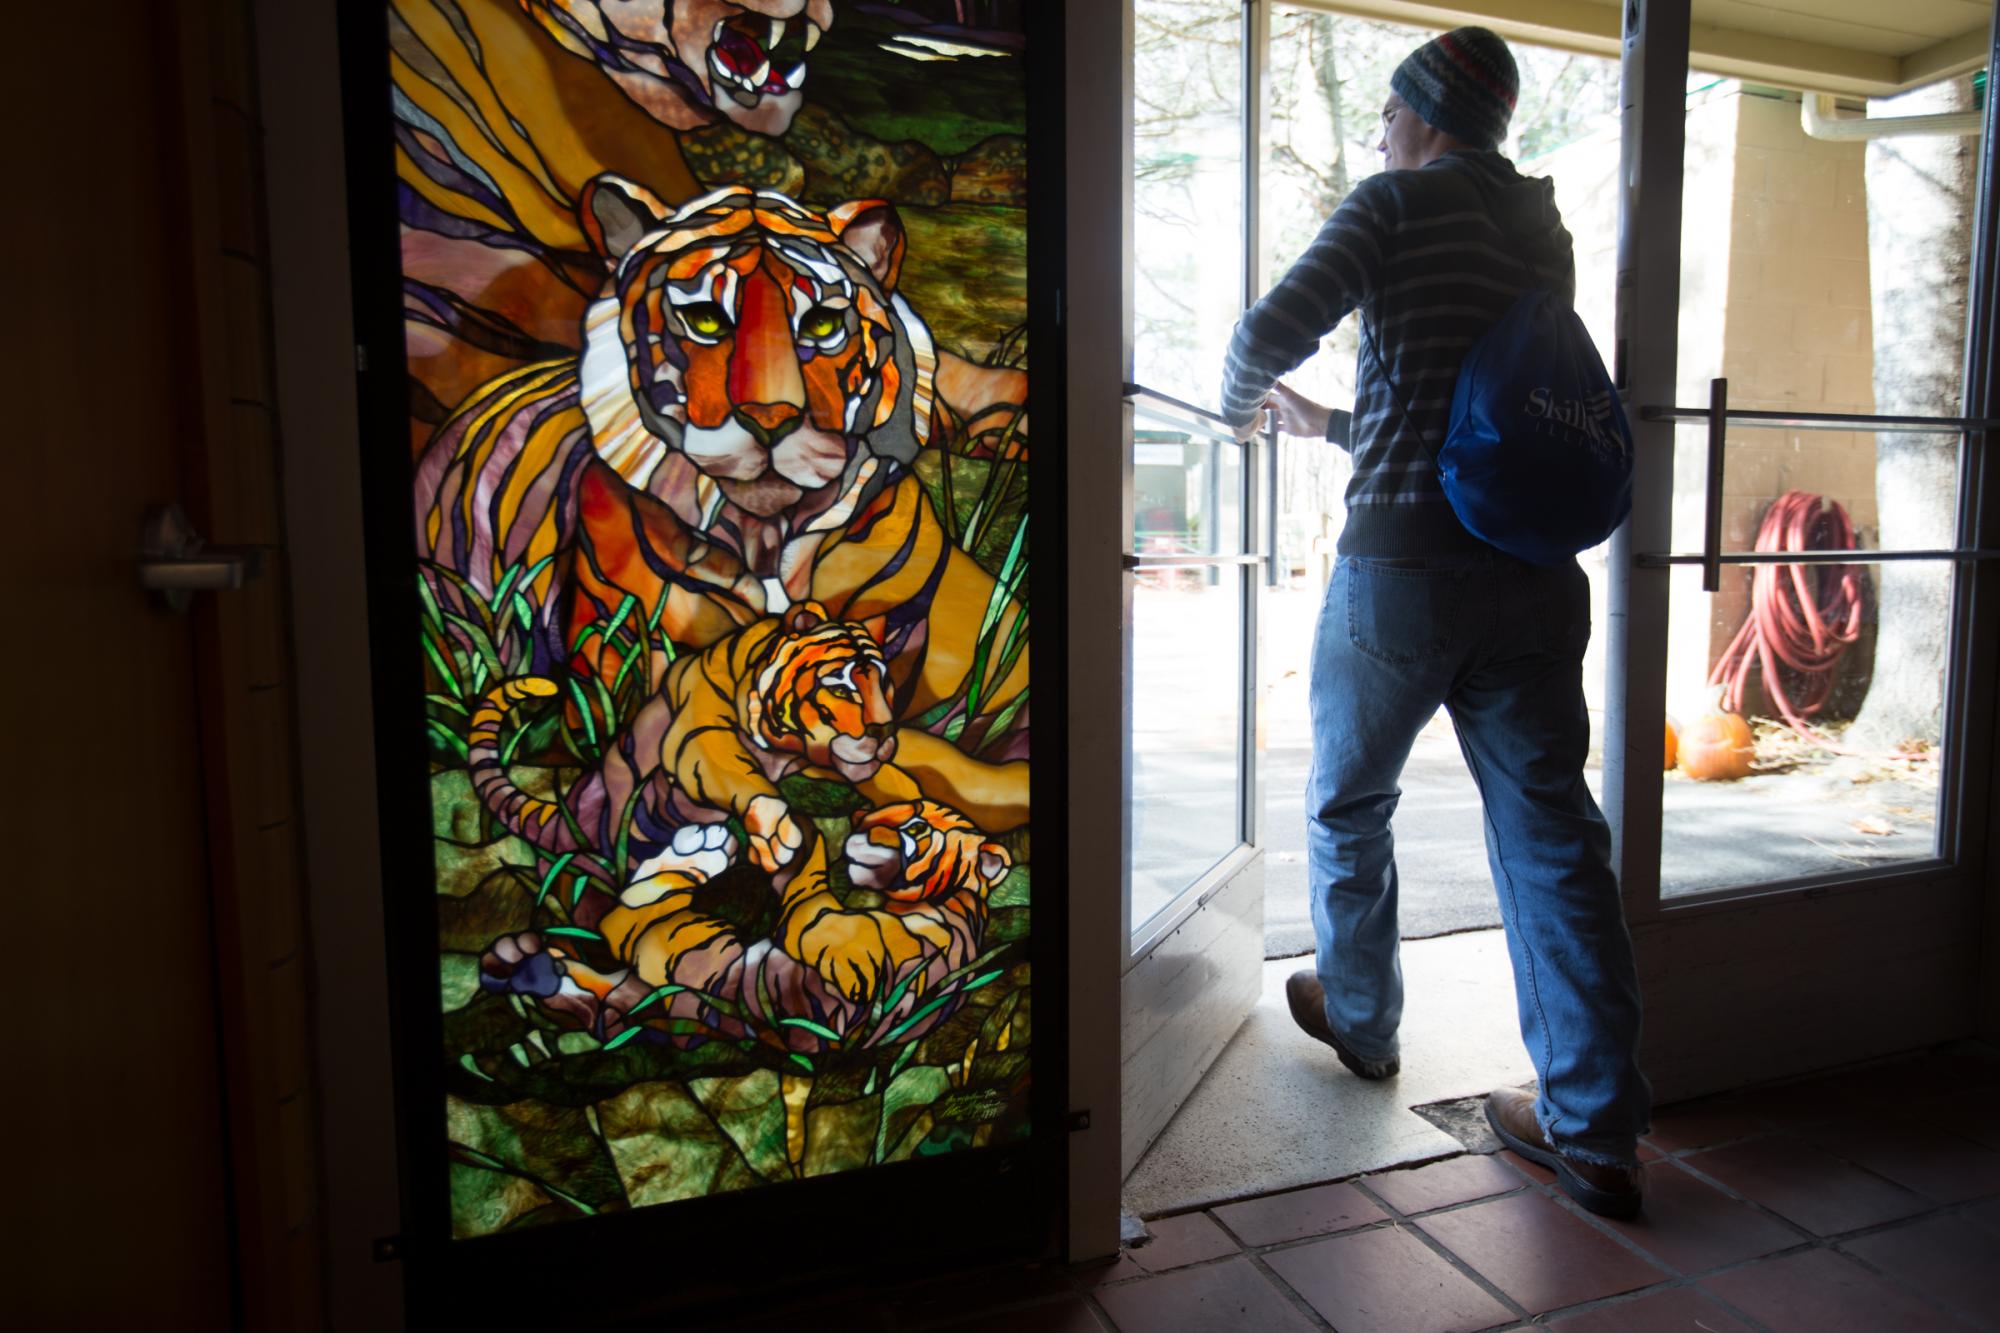 A Tigers for Tigers member attends the club's trip to the Seneca Park Zoo on Nov. 14, 2015. Photograph by Joey Ressler.